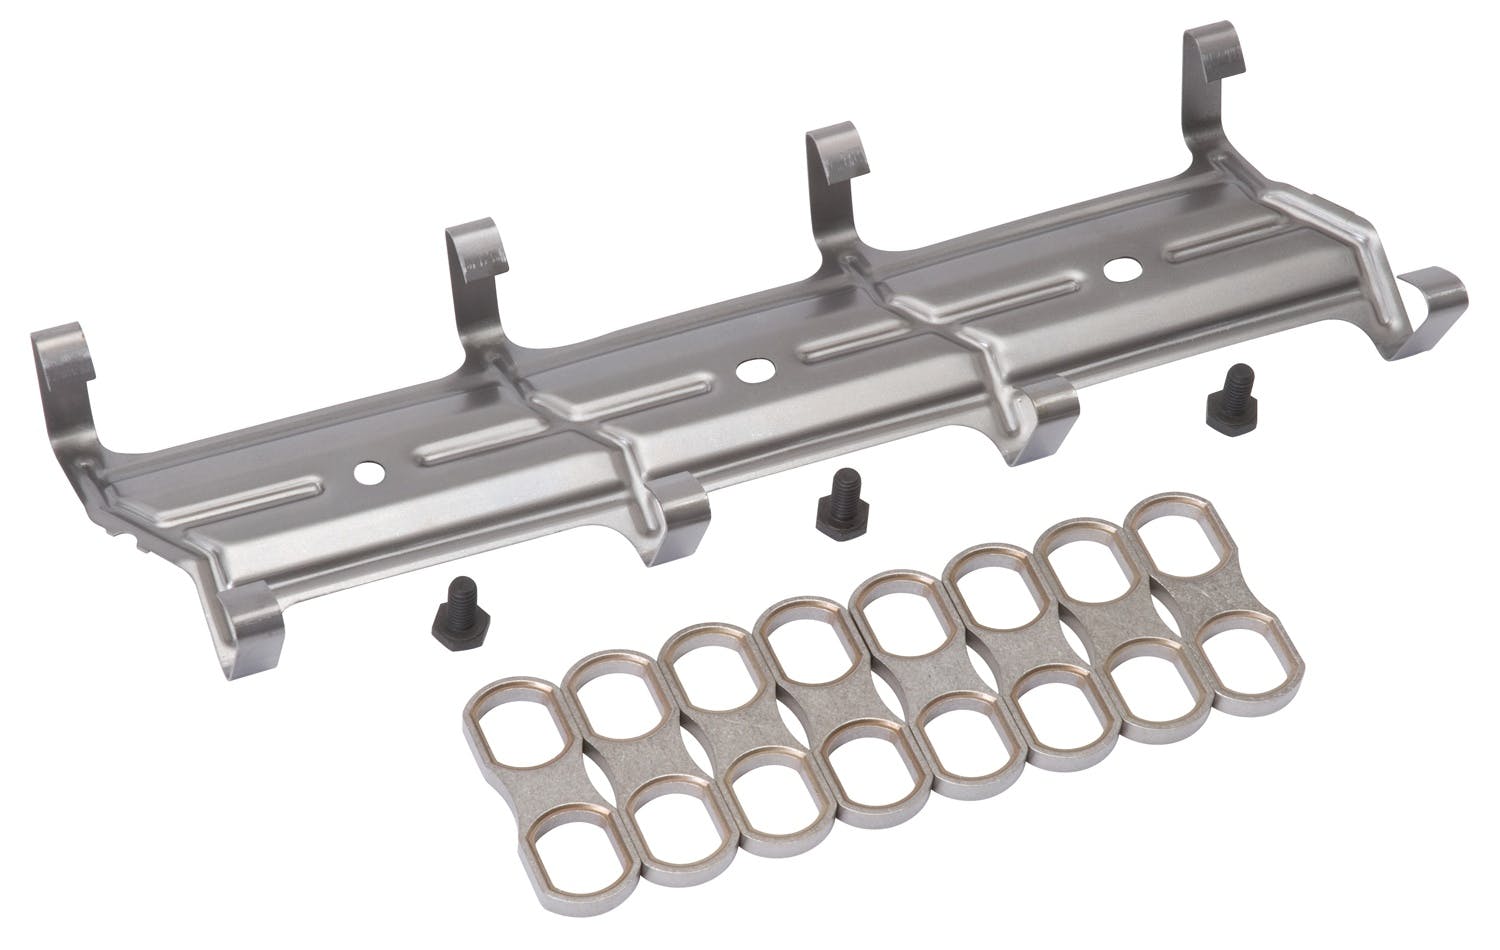 Edelbrock 97387 Hydraulic Roller Lifter Kit for 1996 and Later B/B Chevrolet.